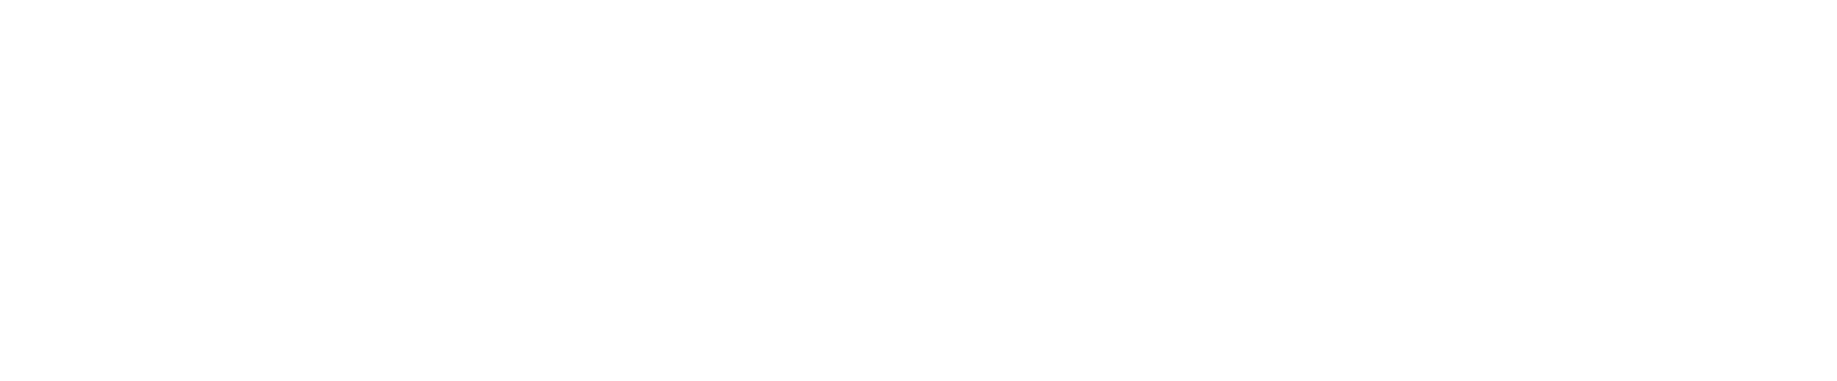 Biological, Environmental, and Earth Sciences Logo